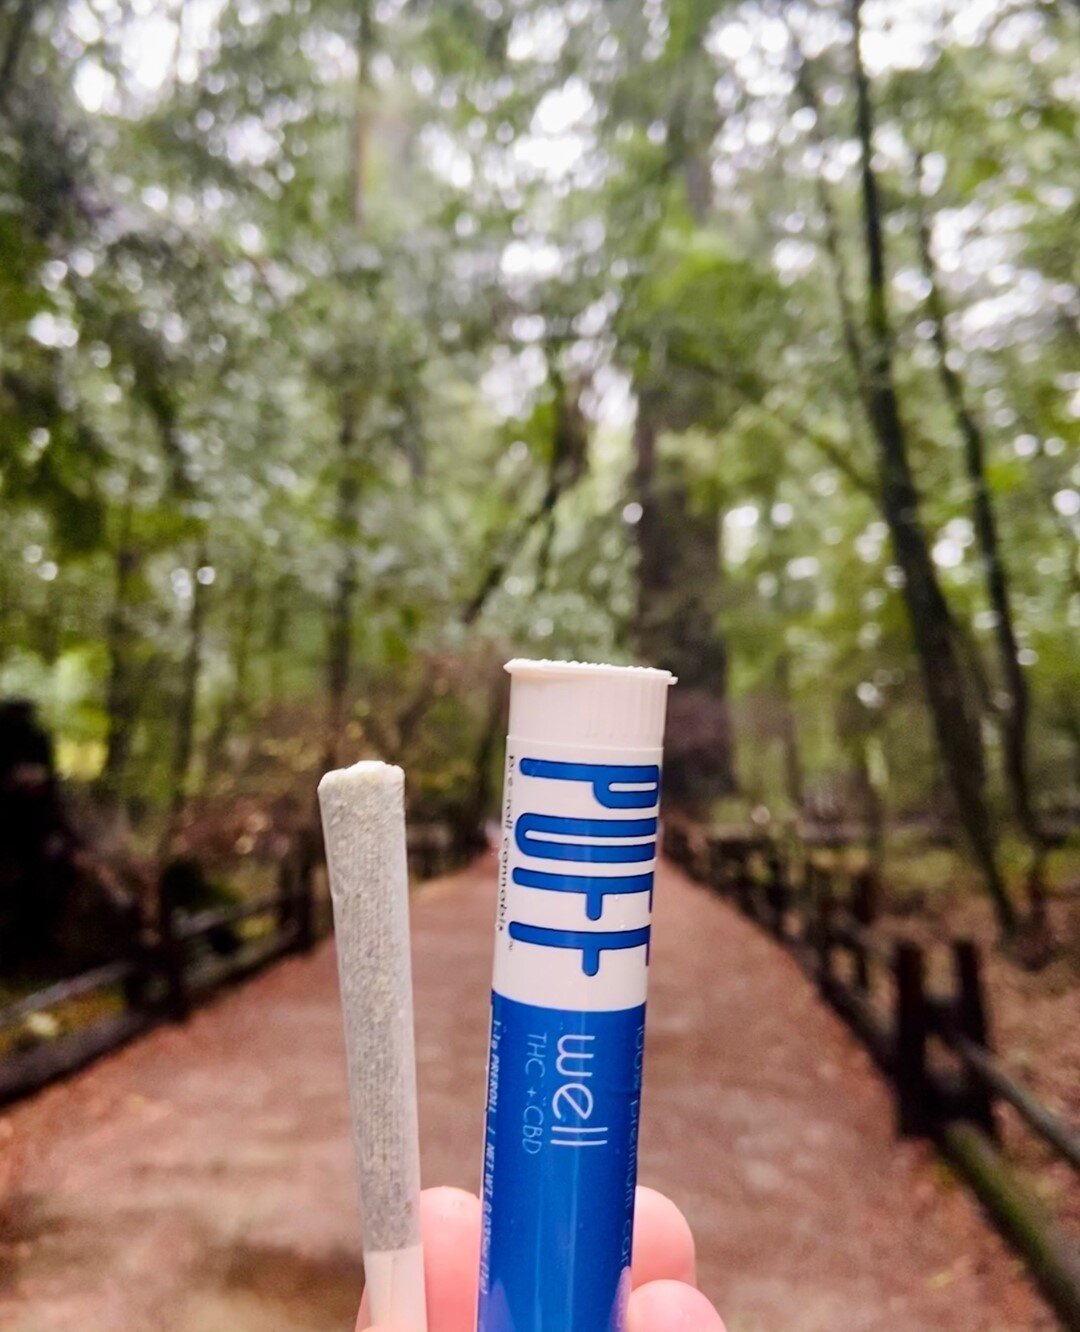 PUFF Well ☺️⁠
⁠
This 2:1 ratio of CBD:THC preroll gives you all the benefits that CBD has to offer.⁠
⁠
A smooth high that&rsquo;s just right for your outdoor jaunts or curling up with your favorite book. ⁠
⁠
Perfect for beginners, mature smokers or people just looking to take the edge off. ⁠
⁠
Rolled with 100% Critical Cure Cannabis Flower 🍁⁠
⁠
#Puff⁠
#Well⁠
#PuffPuff ⁠
#SmokeCbd⁠
#CriticalCure⁠
#ThcSoquel⁠
#LetsAllBeWell⁠
#GetOutdoorsInDecember ⁠
#NaturesCures⁠
#SantaCruzDispensary ⁠
#CannabisPreroll